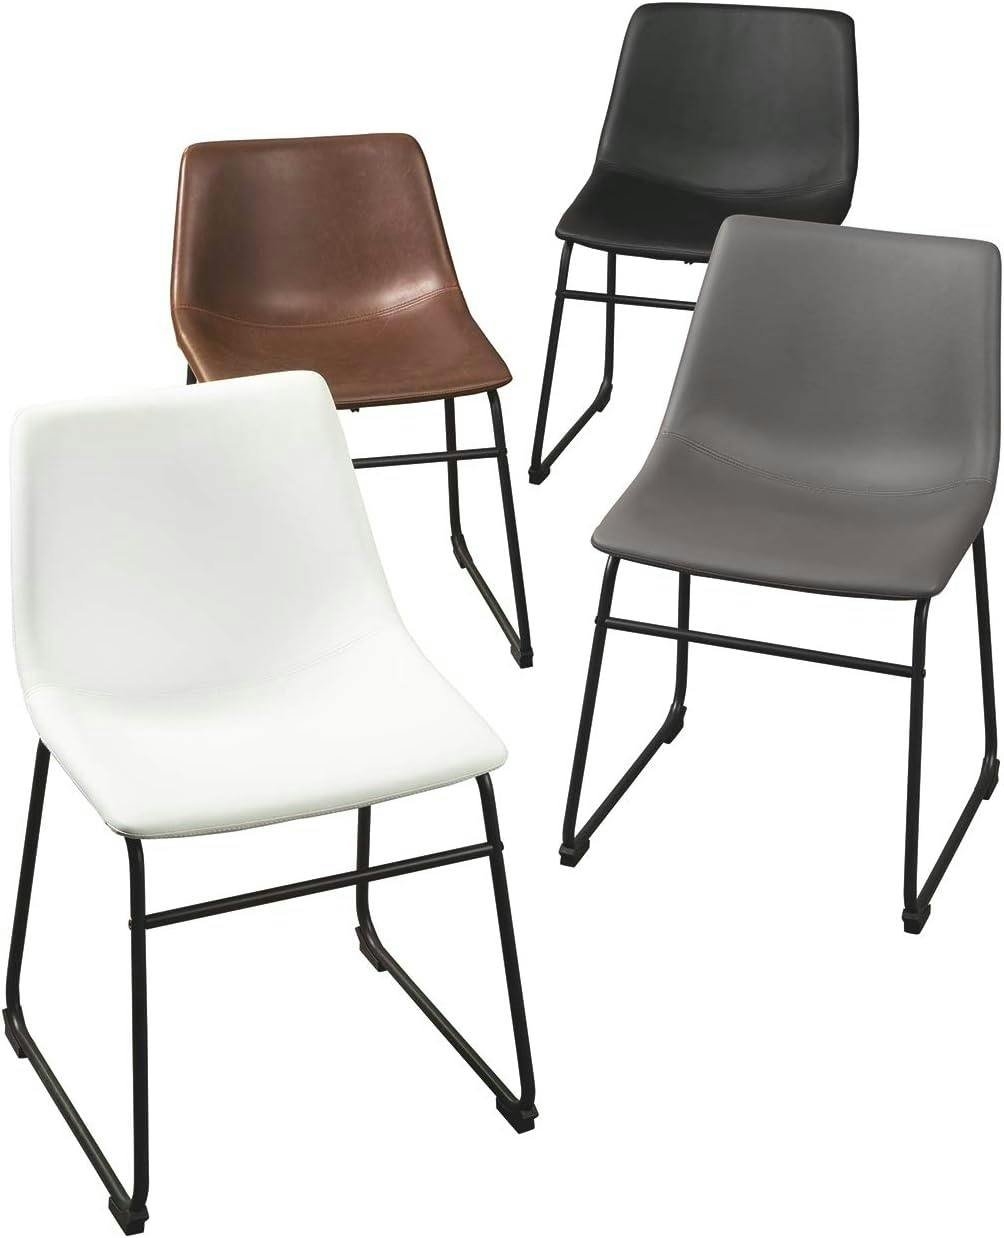 Low Urban Industrial White Faux Leather Side Chair